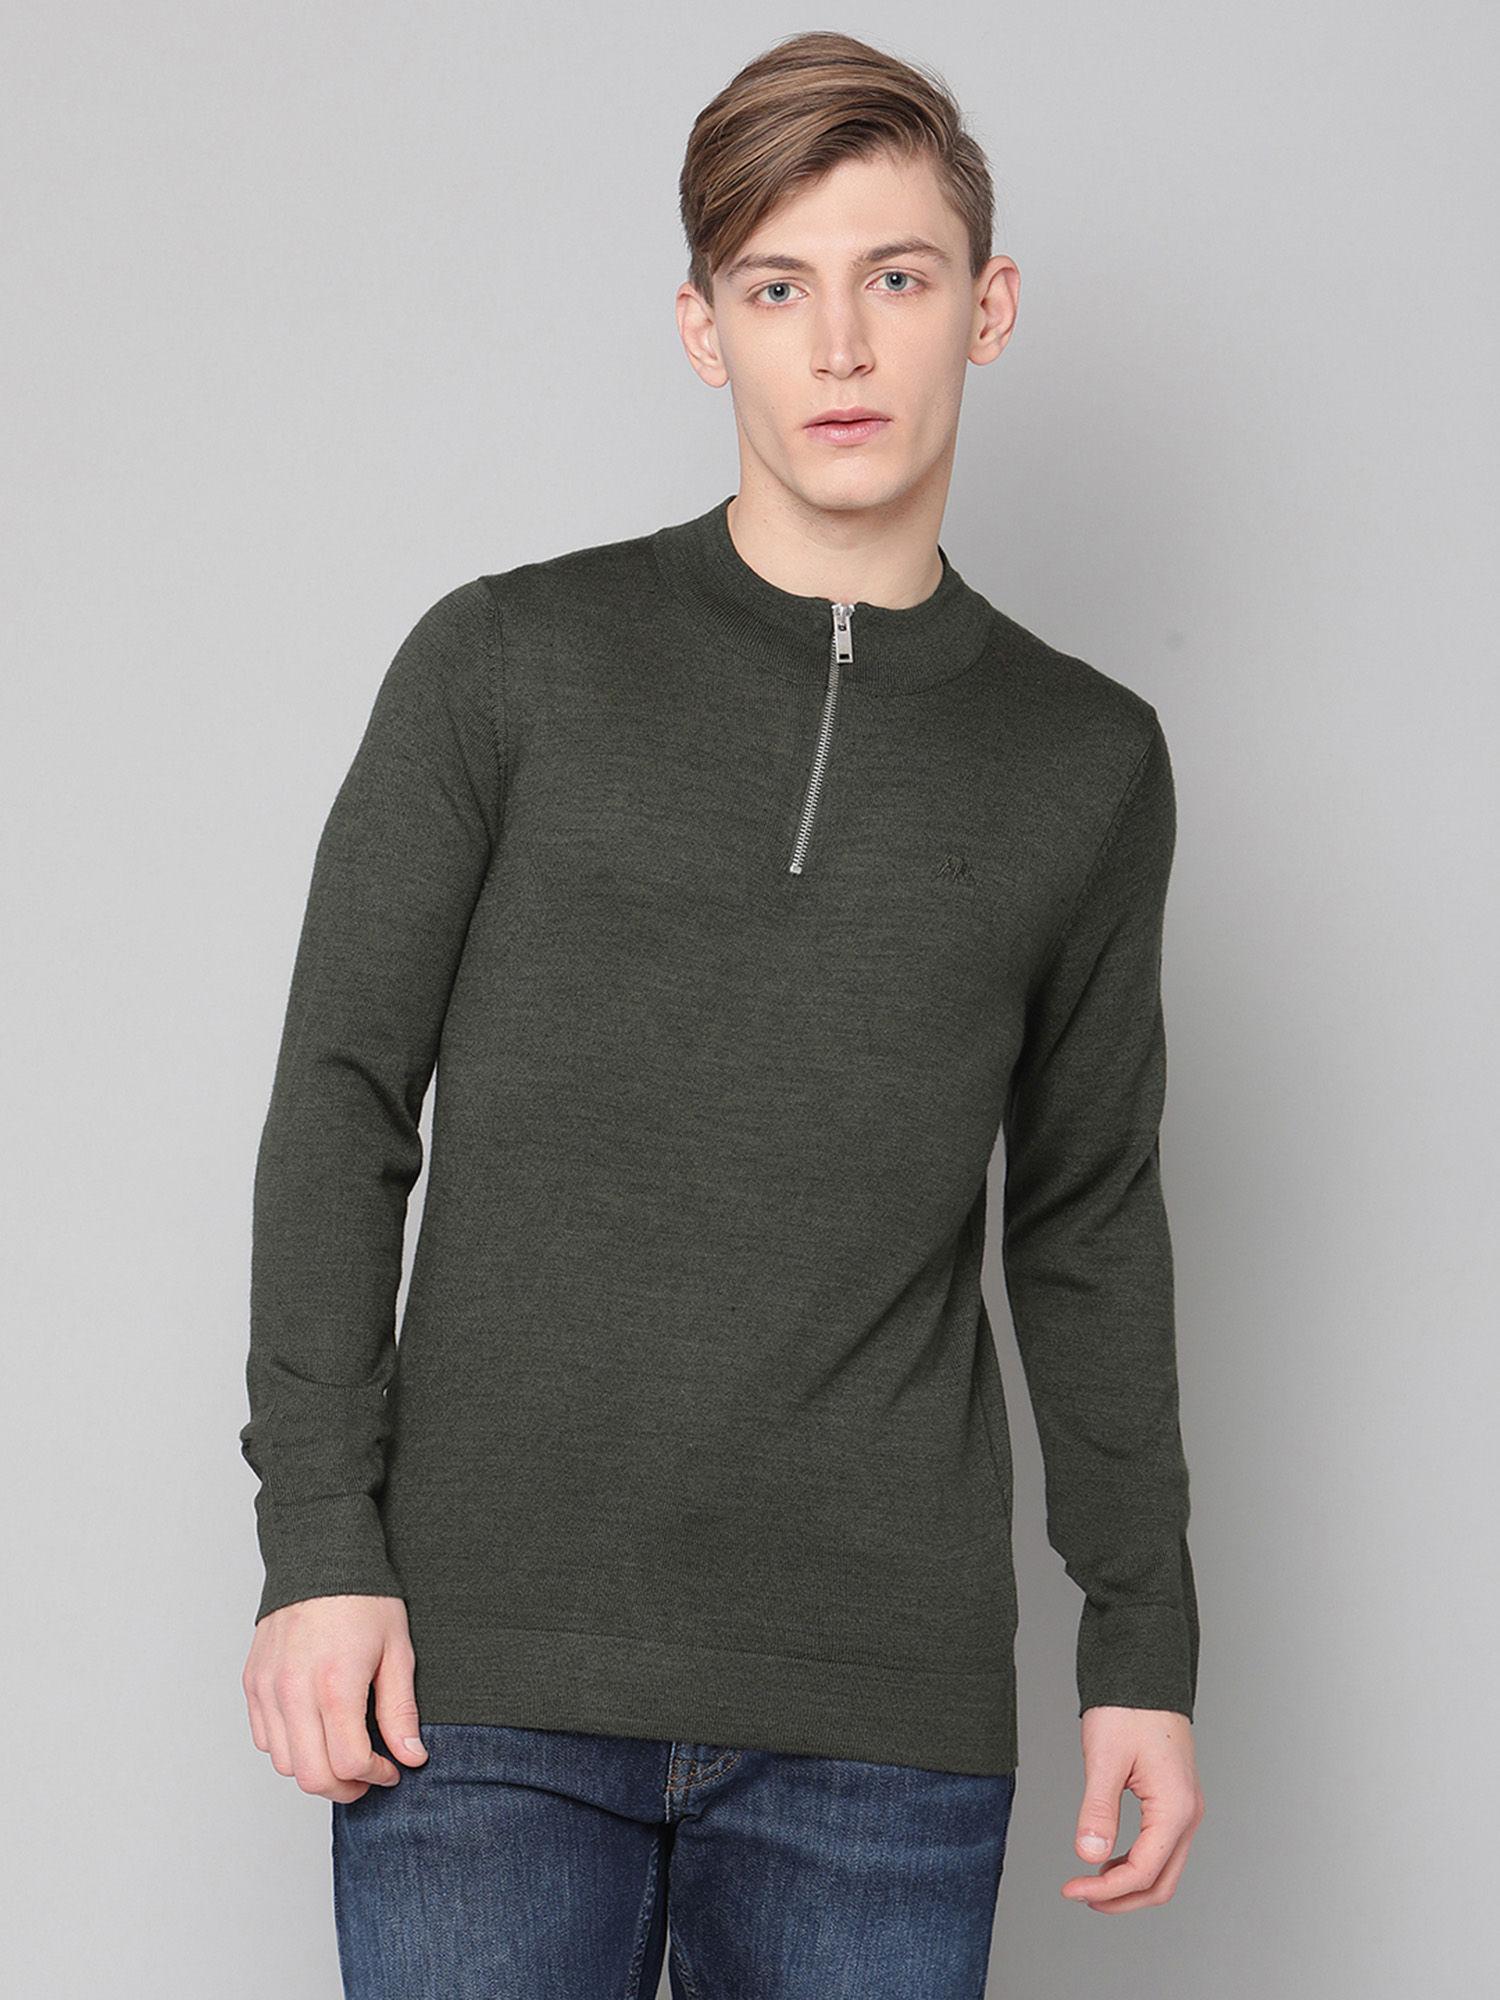 dk-army-solid-round-neck-sweater